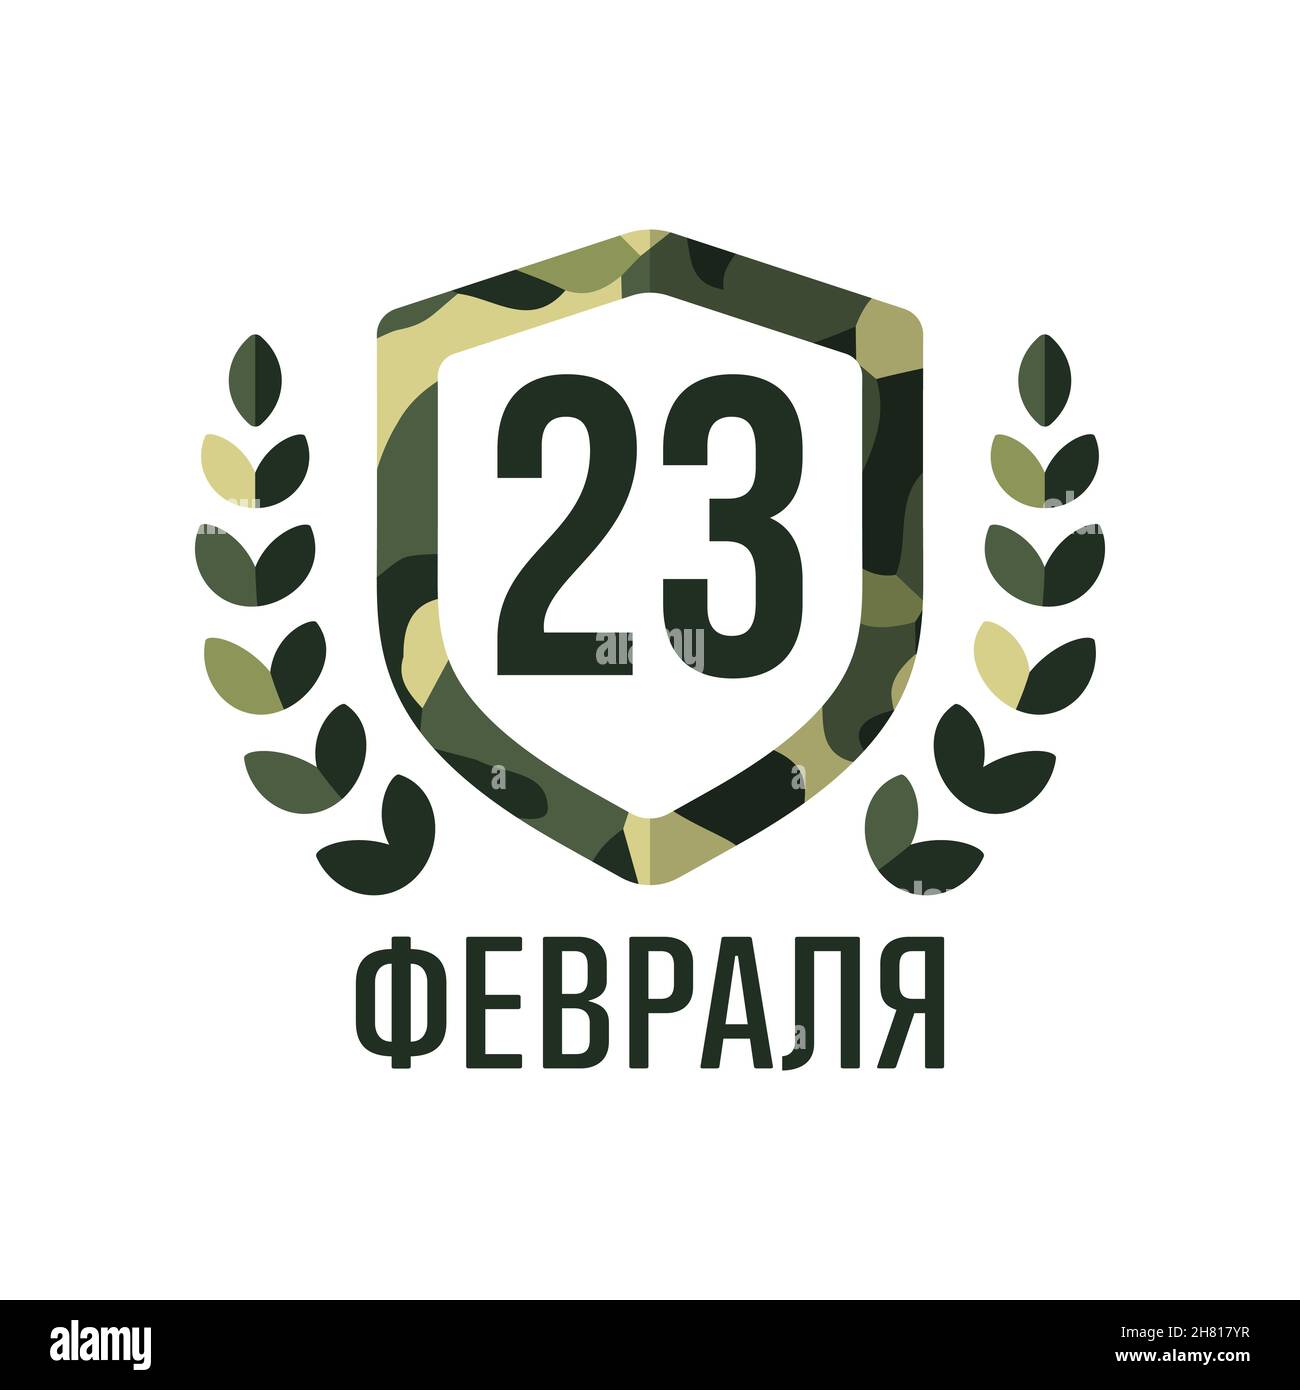 23 february, vector sign. Defender of the Fatherland Day. Translation of Russian inscription: February 23. Military design element Stock Vector